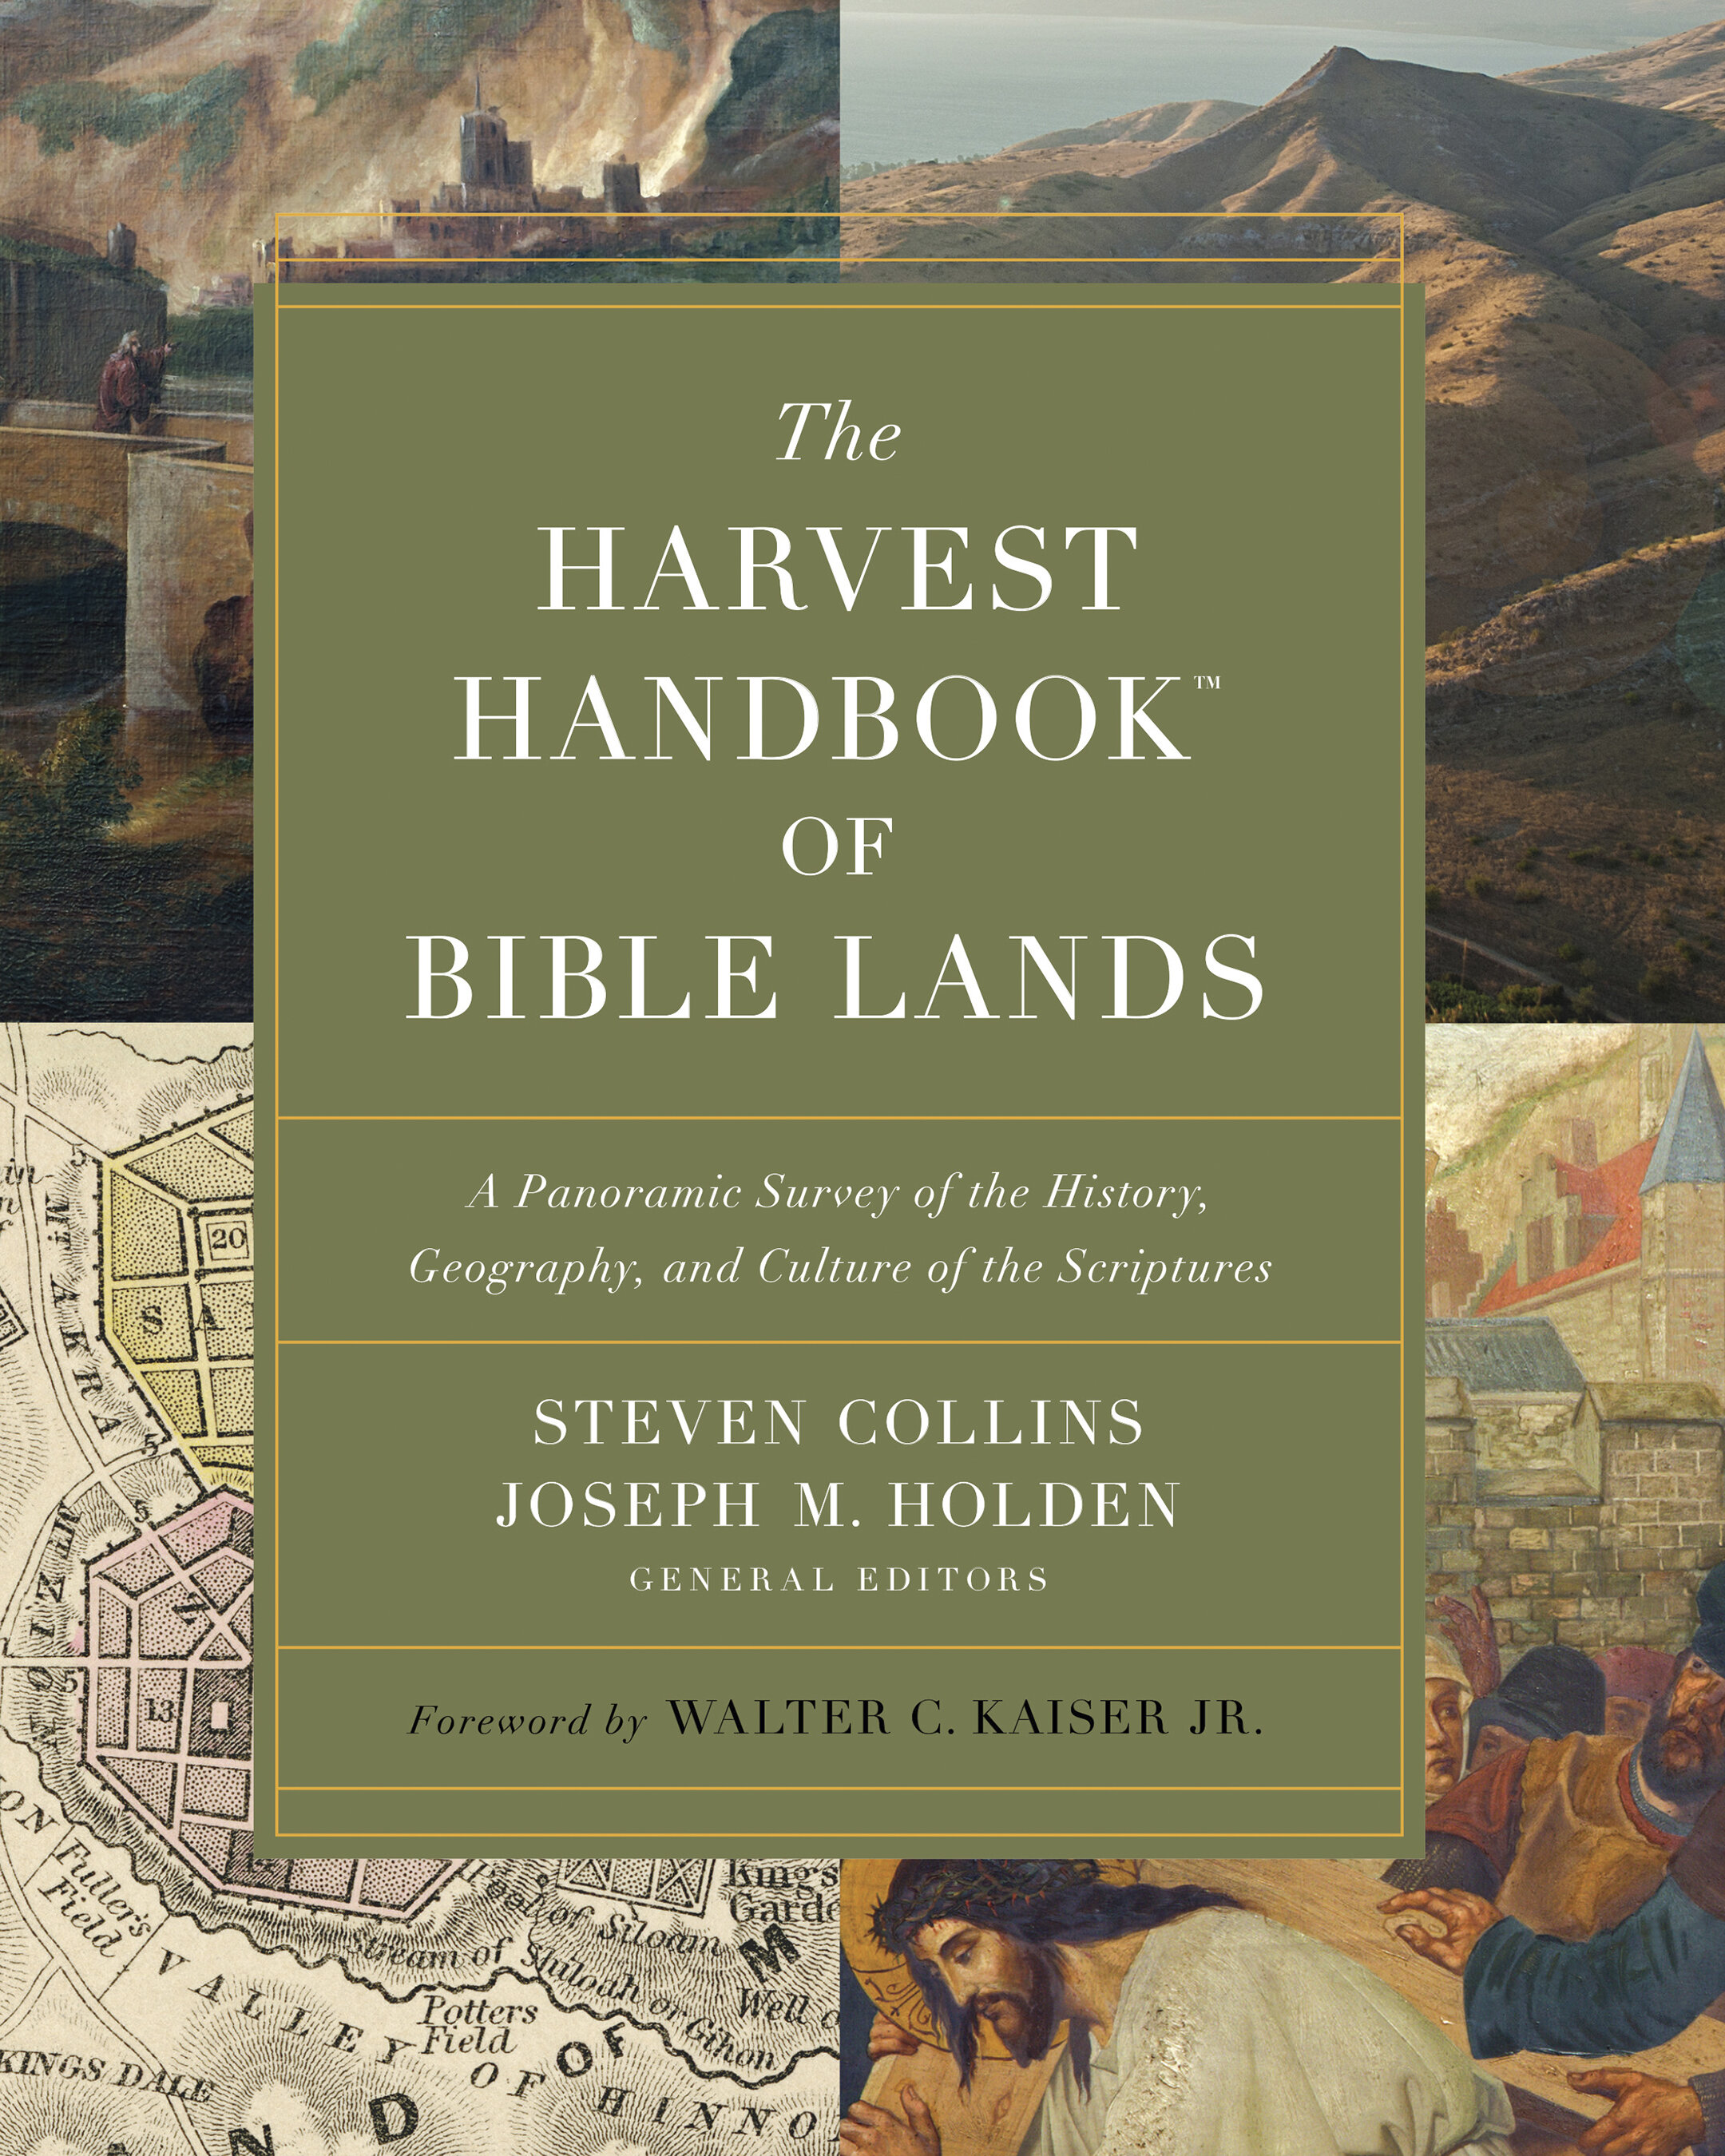 The Harvest Handbook of Bible Lands: A Panoramic Survey of the History, Geography, and Culture of the Scriptures